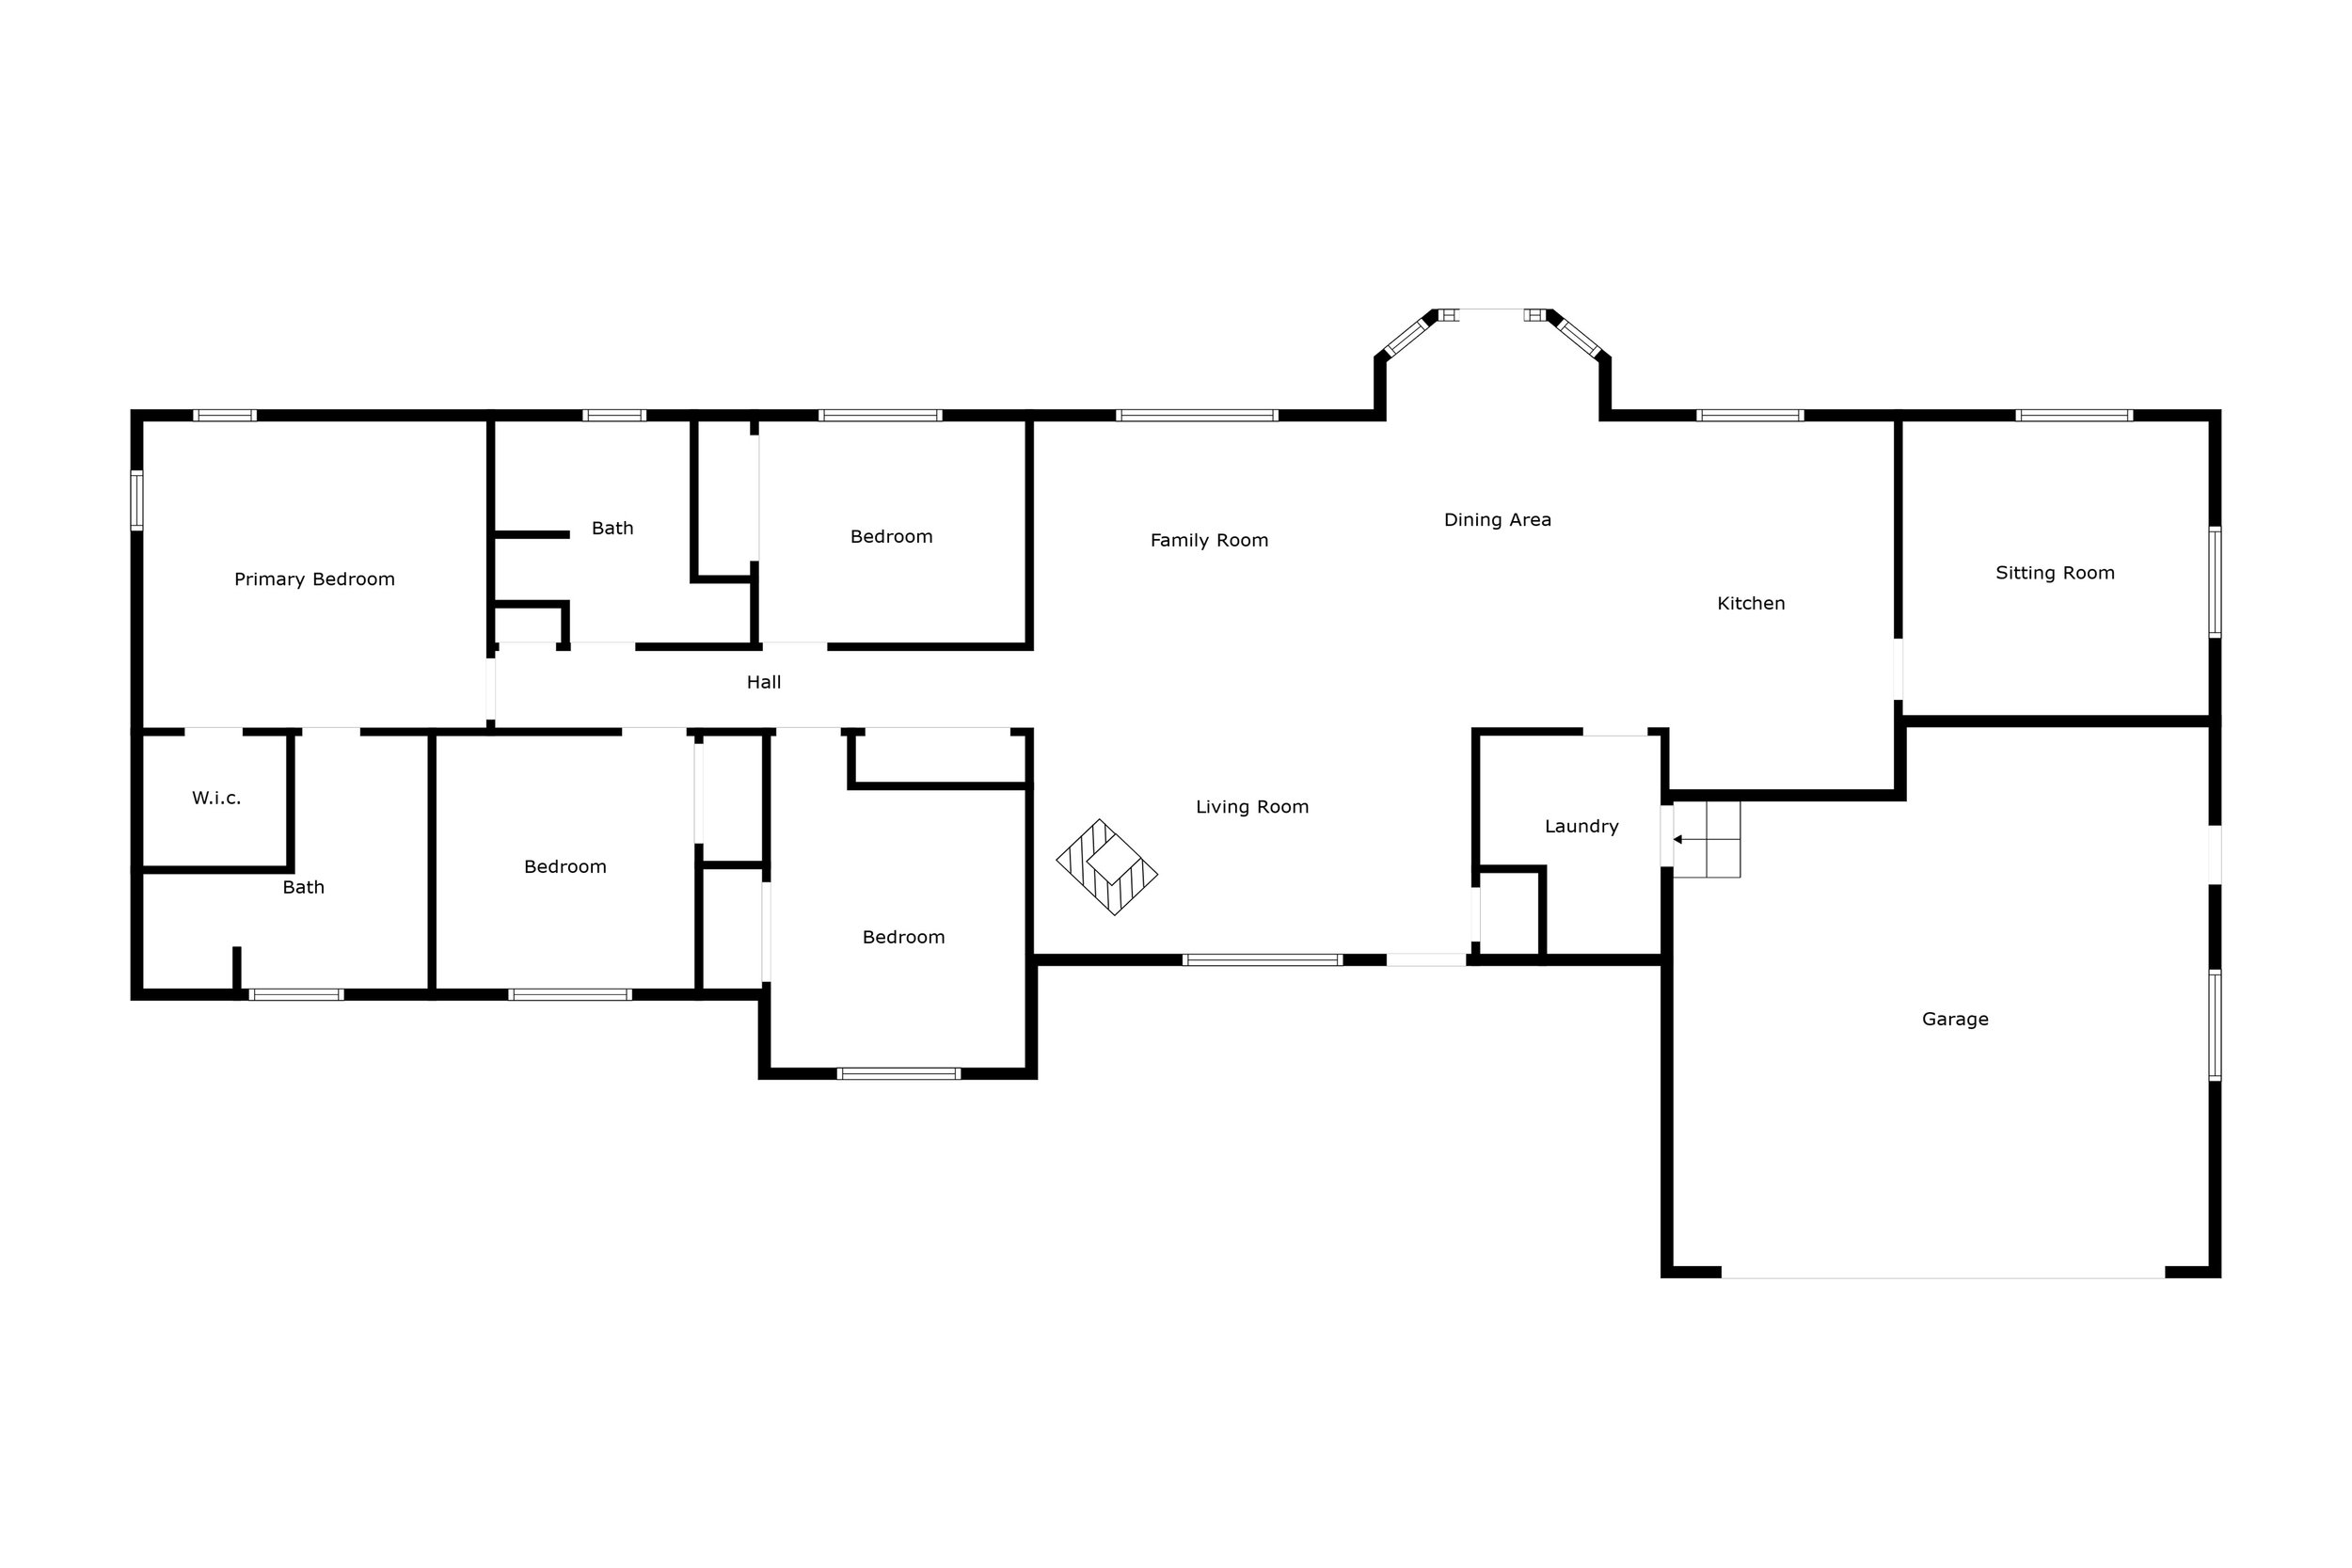 Floor plan without Dimensions.jpg